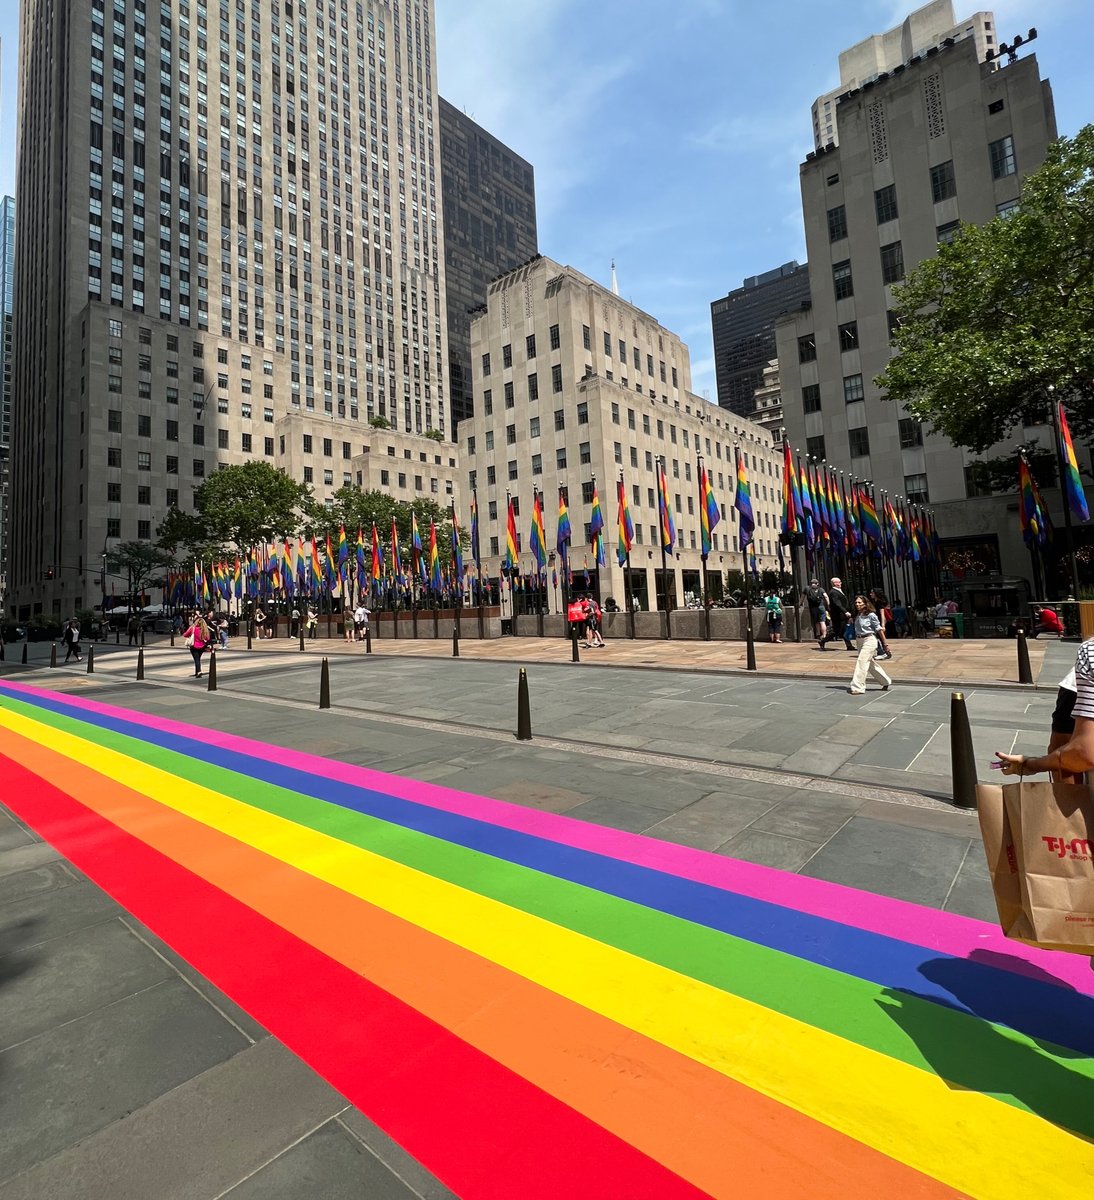 All the country flags were replaced with 🏳️‍🌈 Rockefeller Center, NY, is ready for pride! #HappyPride